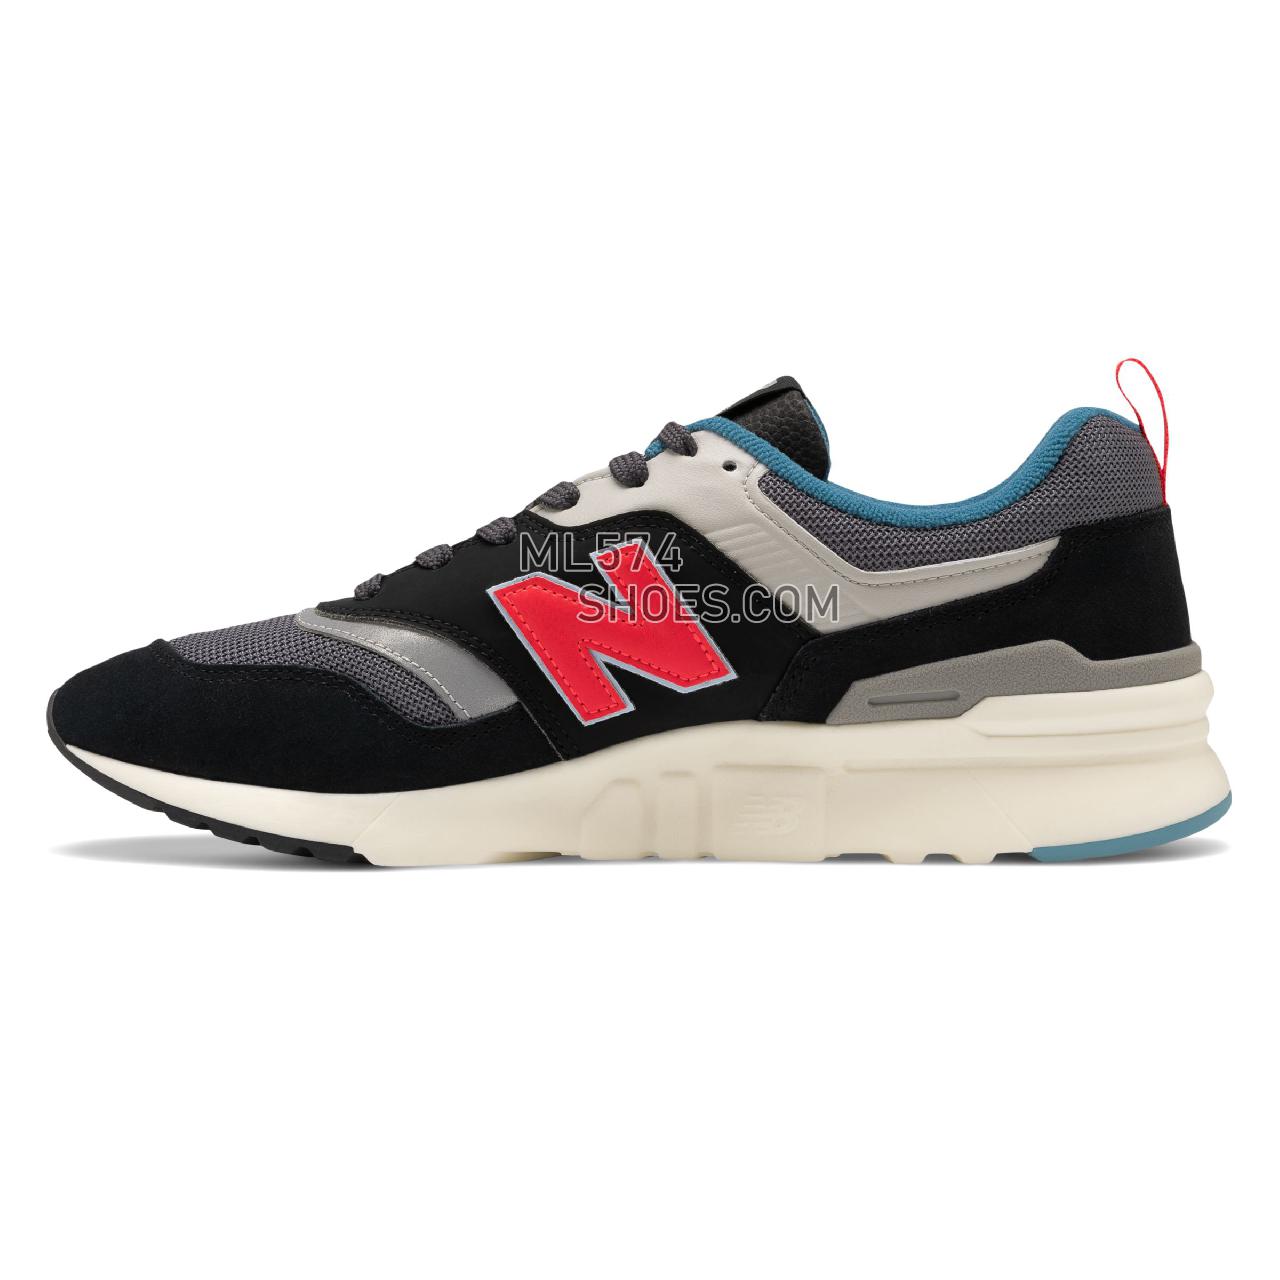 New Balance 997H - Men's Classic Sneakers - Magnet with Energy Red - CM997HAI